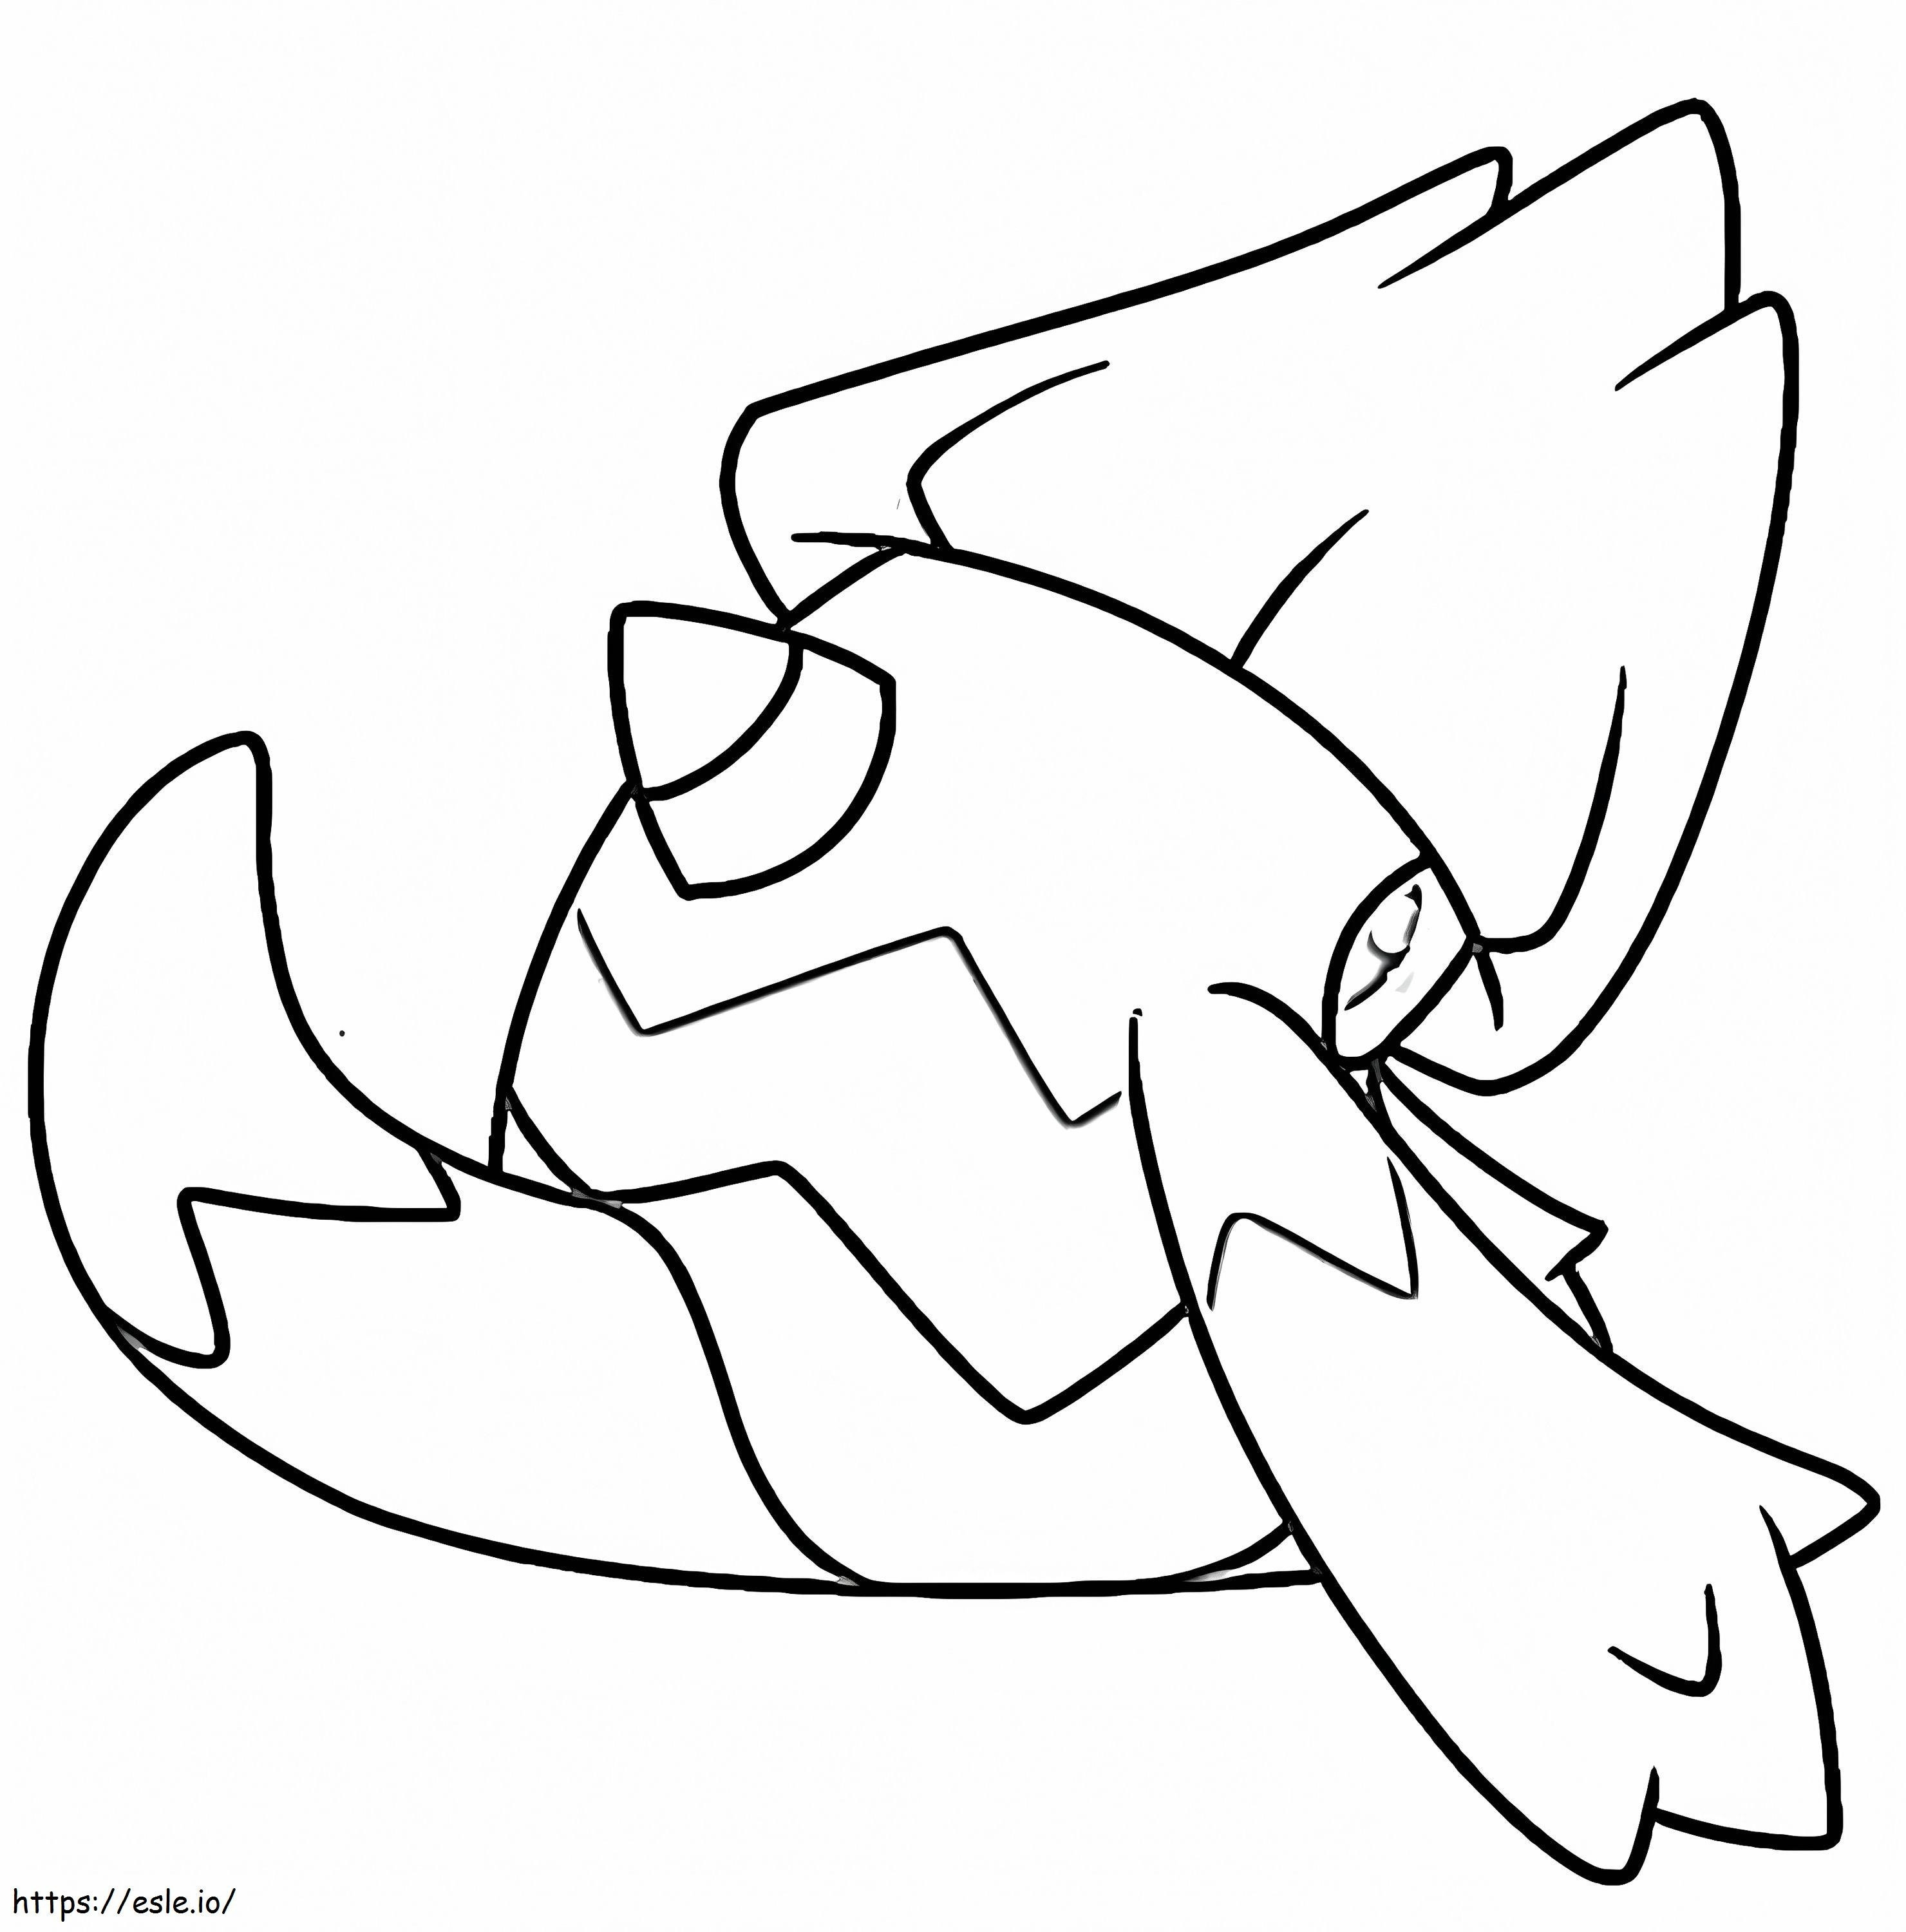 Snover Pokemon 2 coloring page